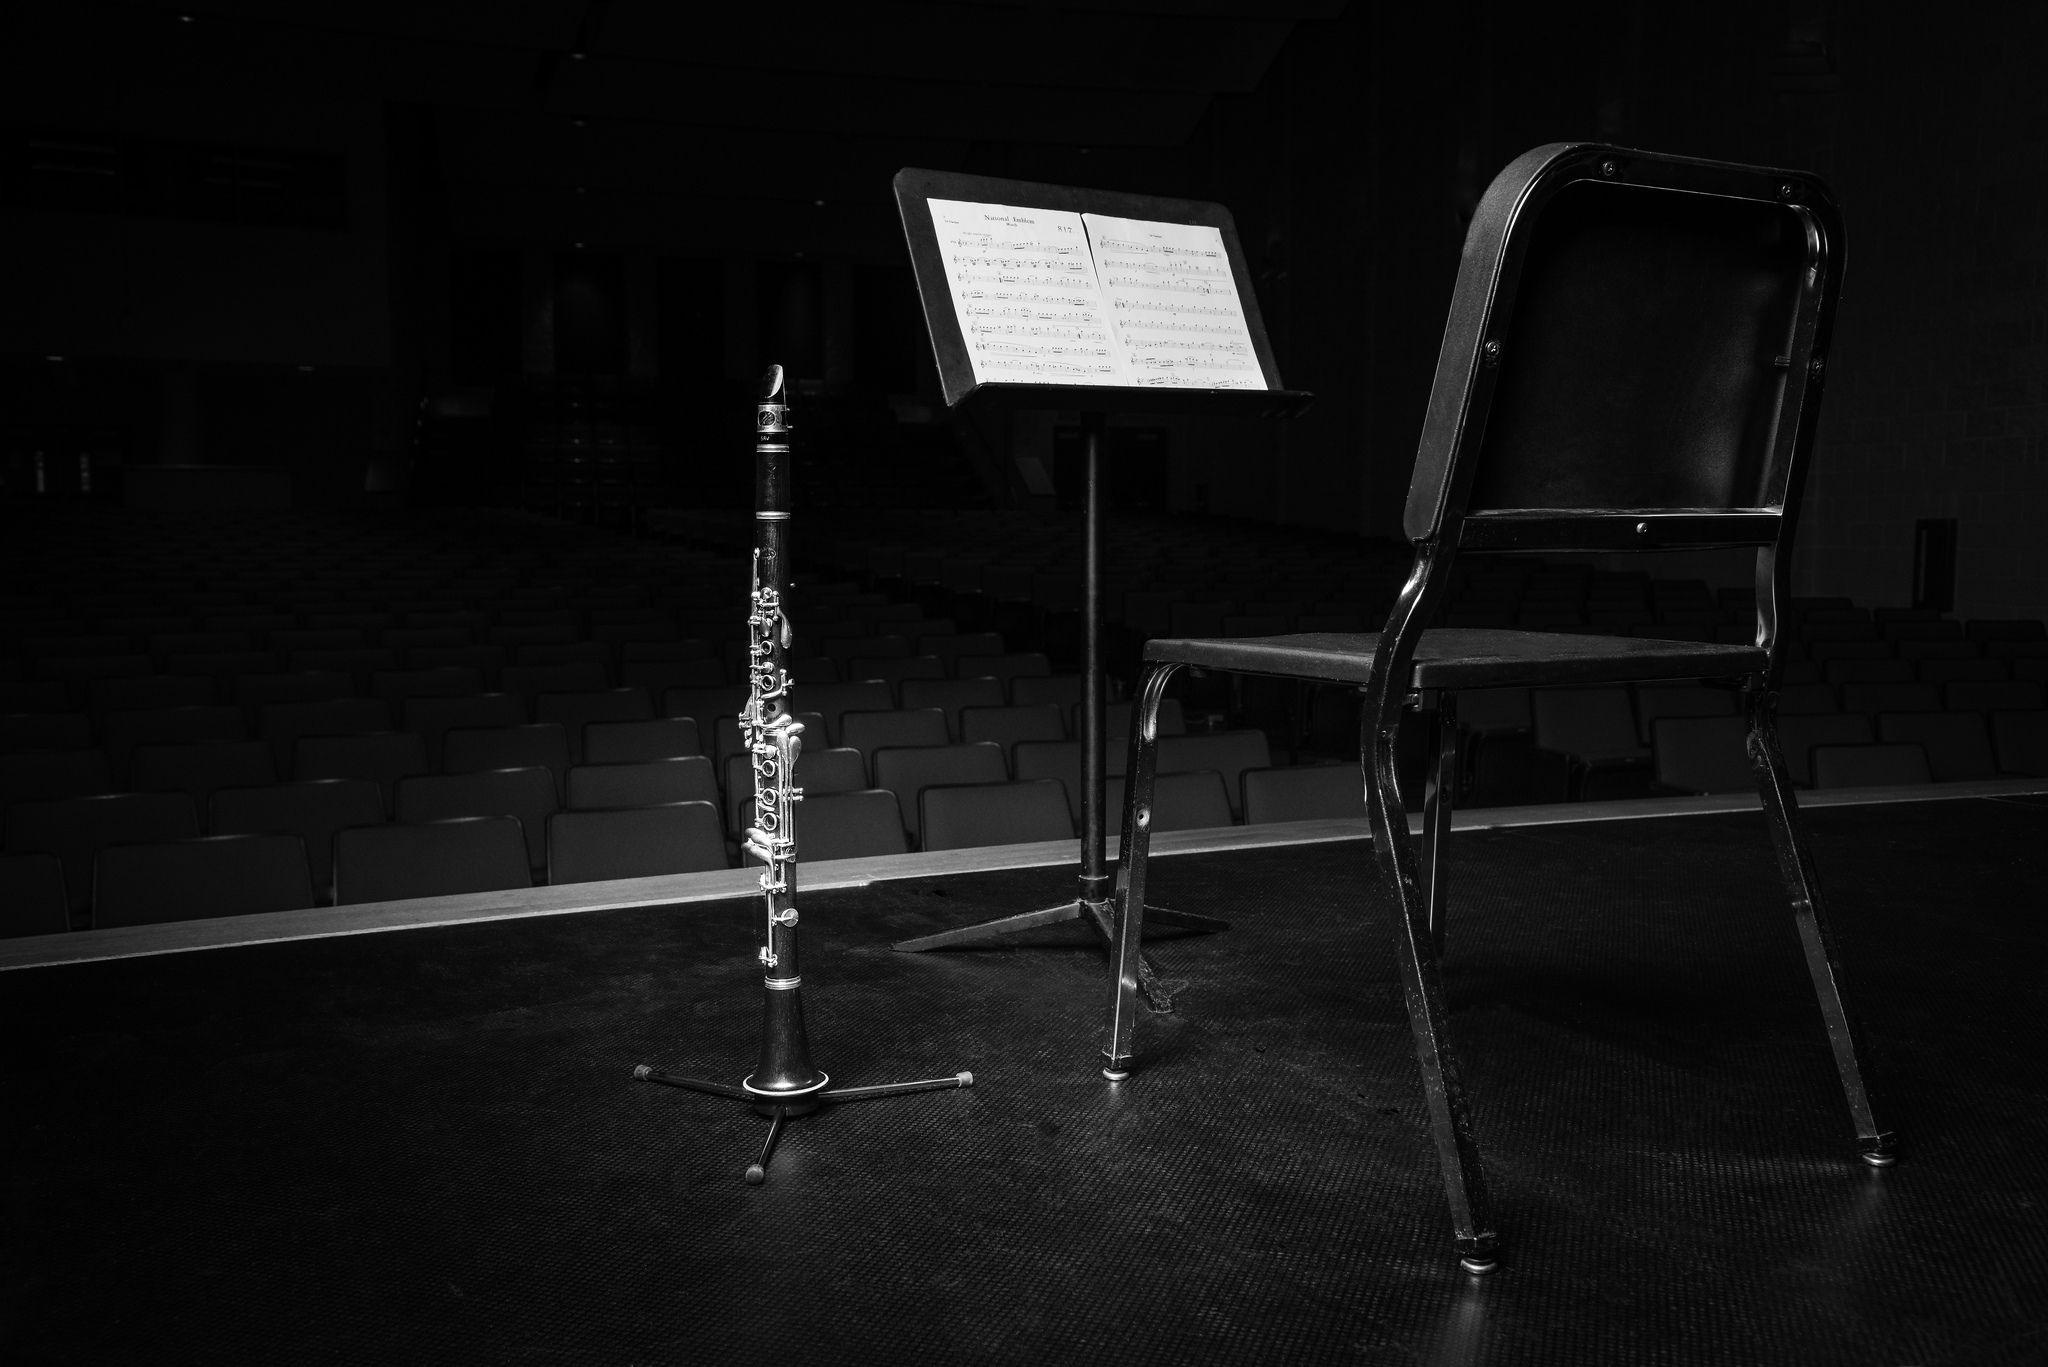 Clarinet: Orchestra chair, Music stand, Stage performance, Monochrome, Musical instrument on a stand. 2050x1370 HD Wallpaper.